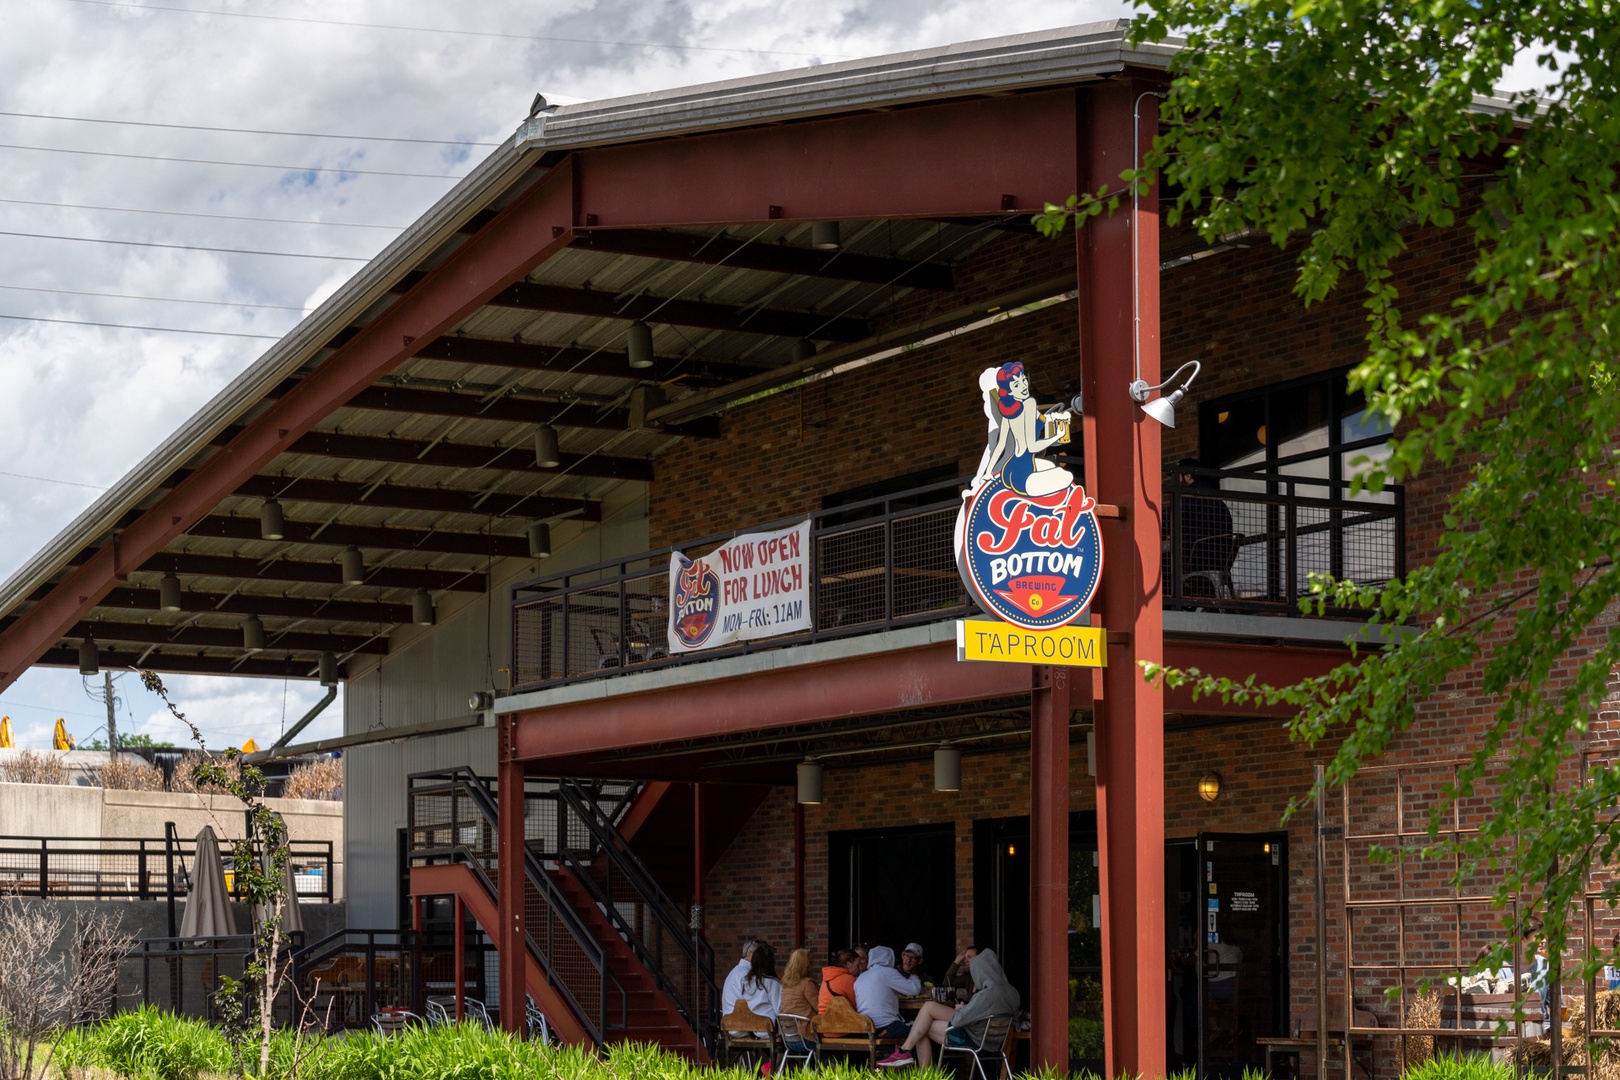 Head over to Fat Bottom Brewing to celebrate your arrival in the Music City, just steps away